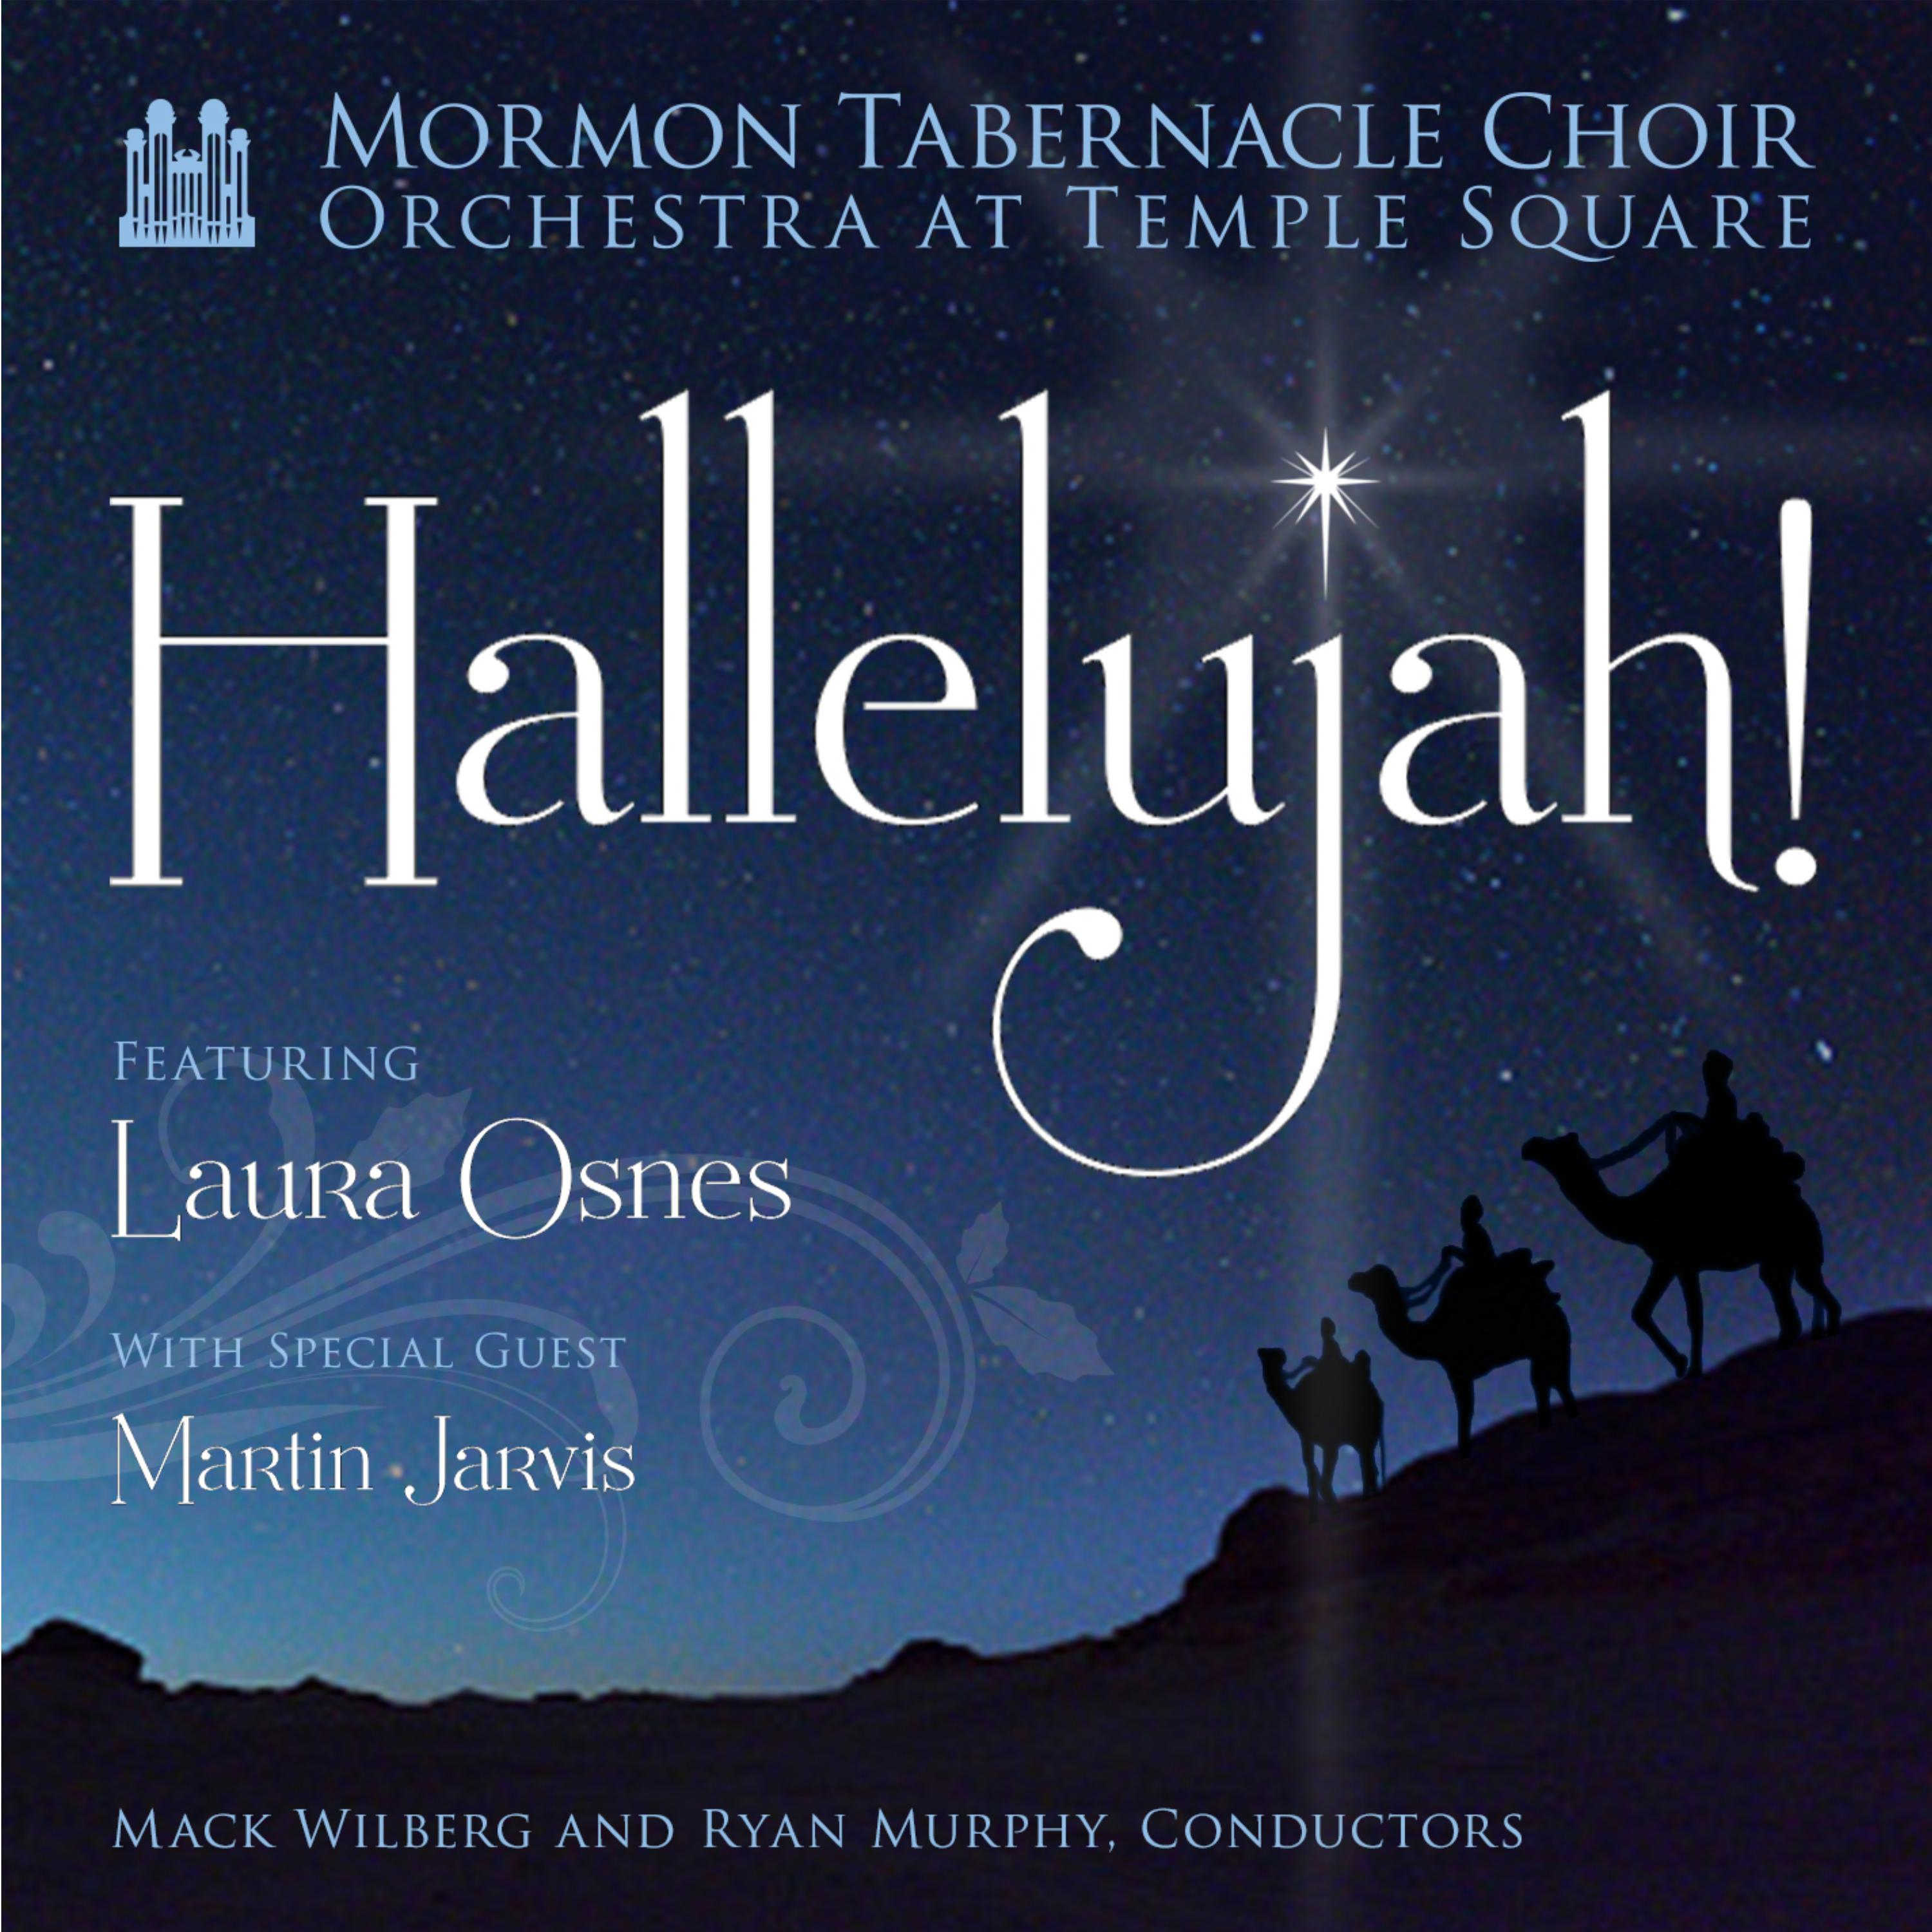 The Tabernacle Choir at Temple Square - Angels from the Realms of Glory